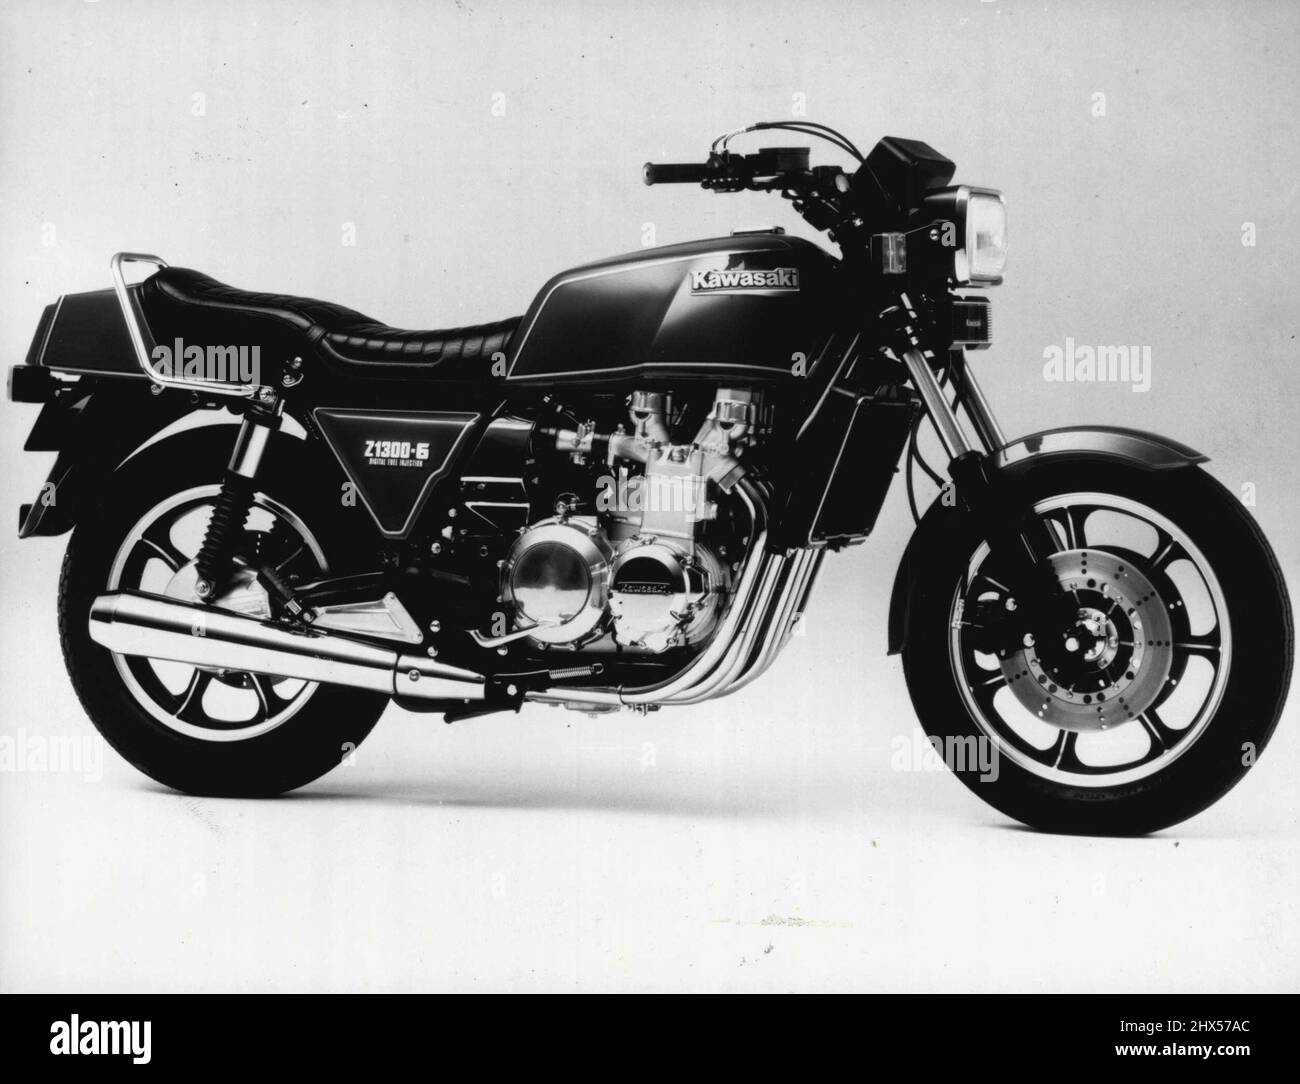 KSM14 - Kawasaki's 1984 model, six cylinder Z1300 is fitted with digital fuel injection. June 17, 1941. Stock Photo